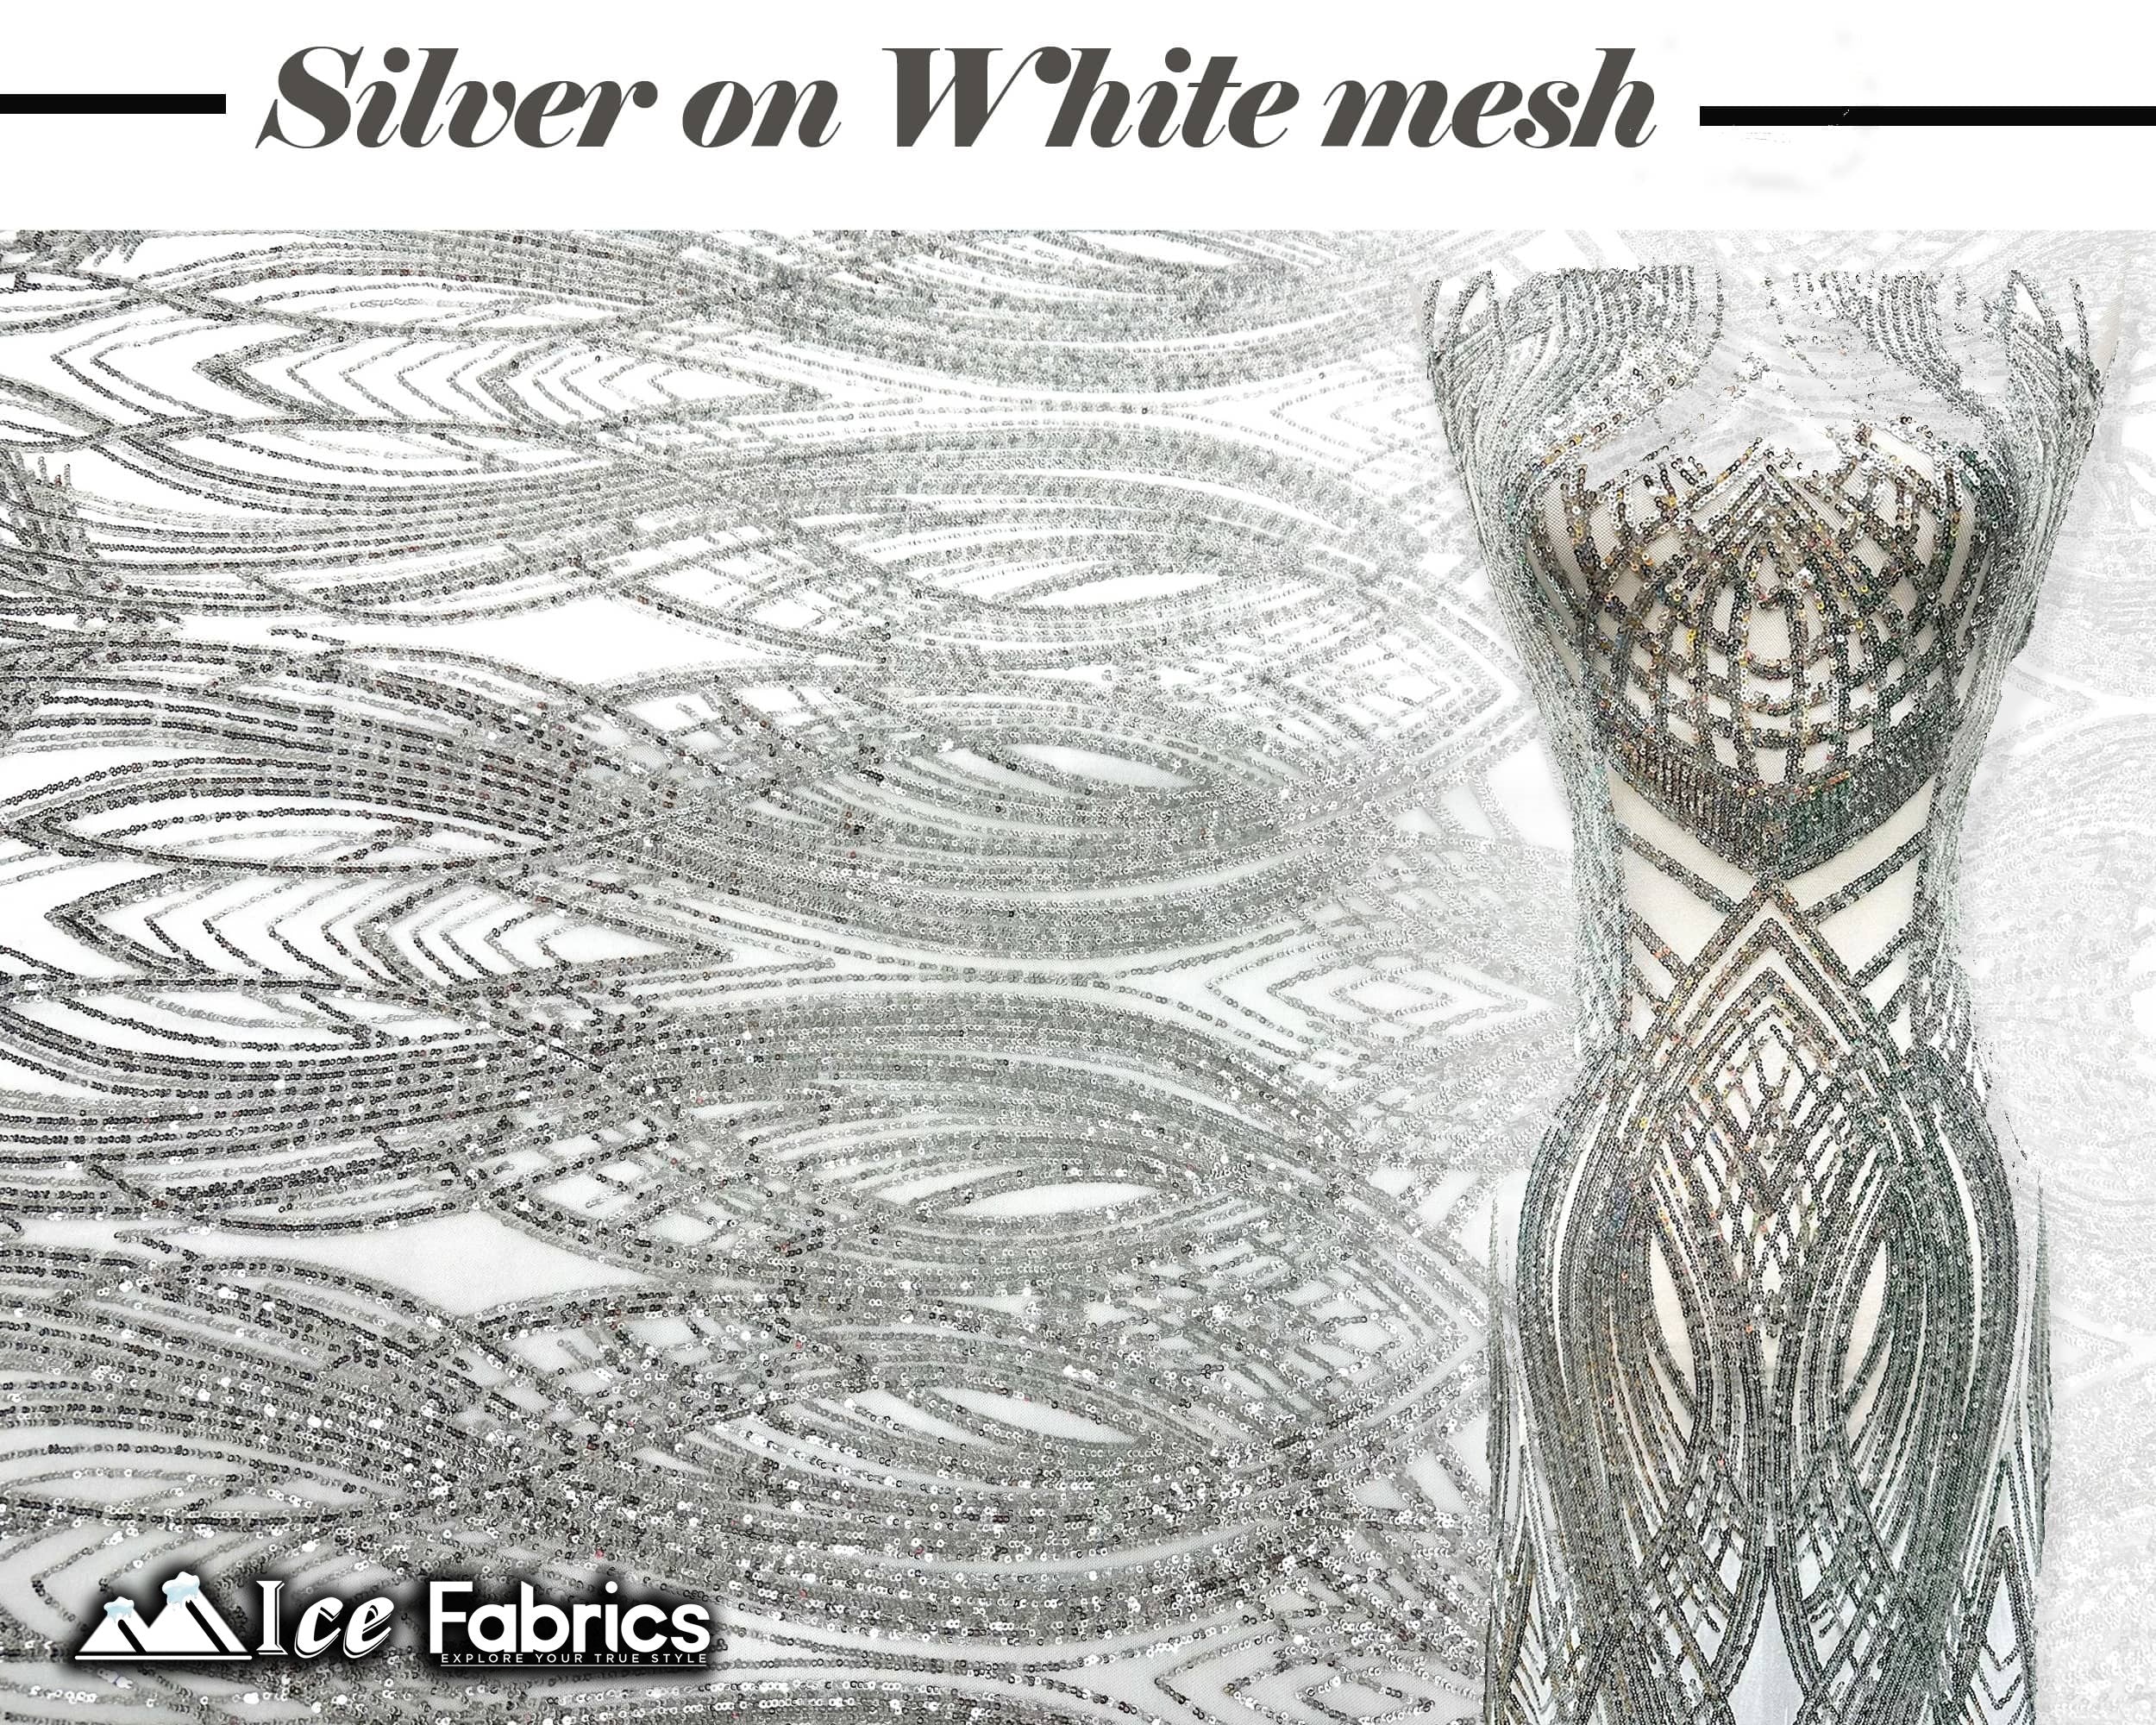 Peacock Sequin Fabric By The Yard 4 Way Stretch Spandex ICE FABRICS Silver on White Mesh